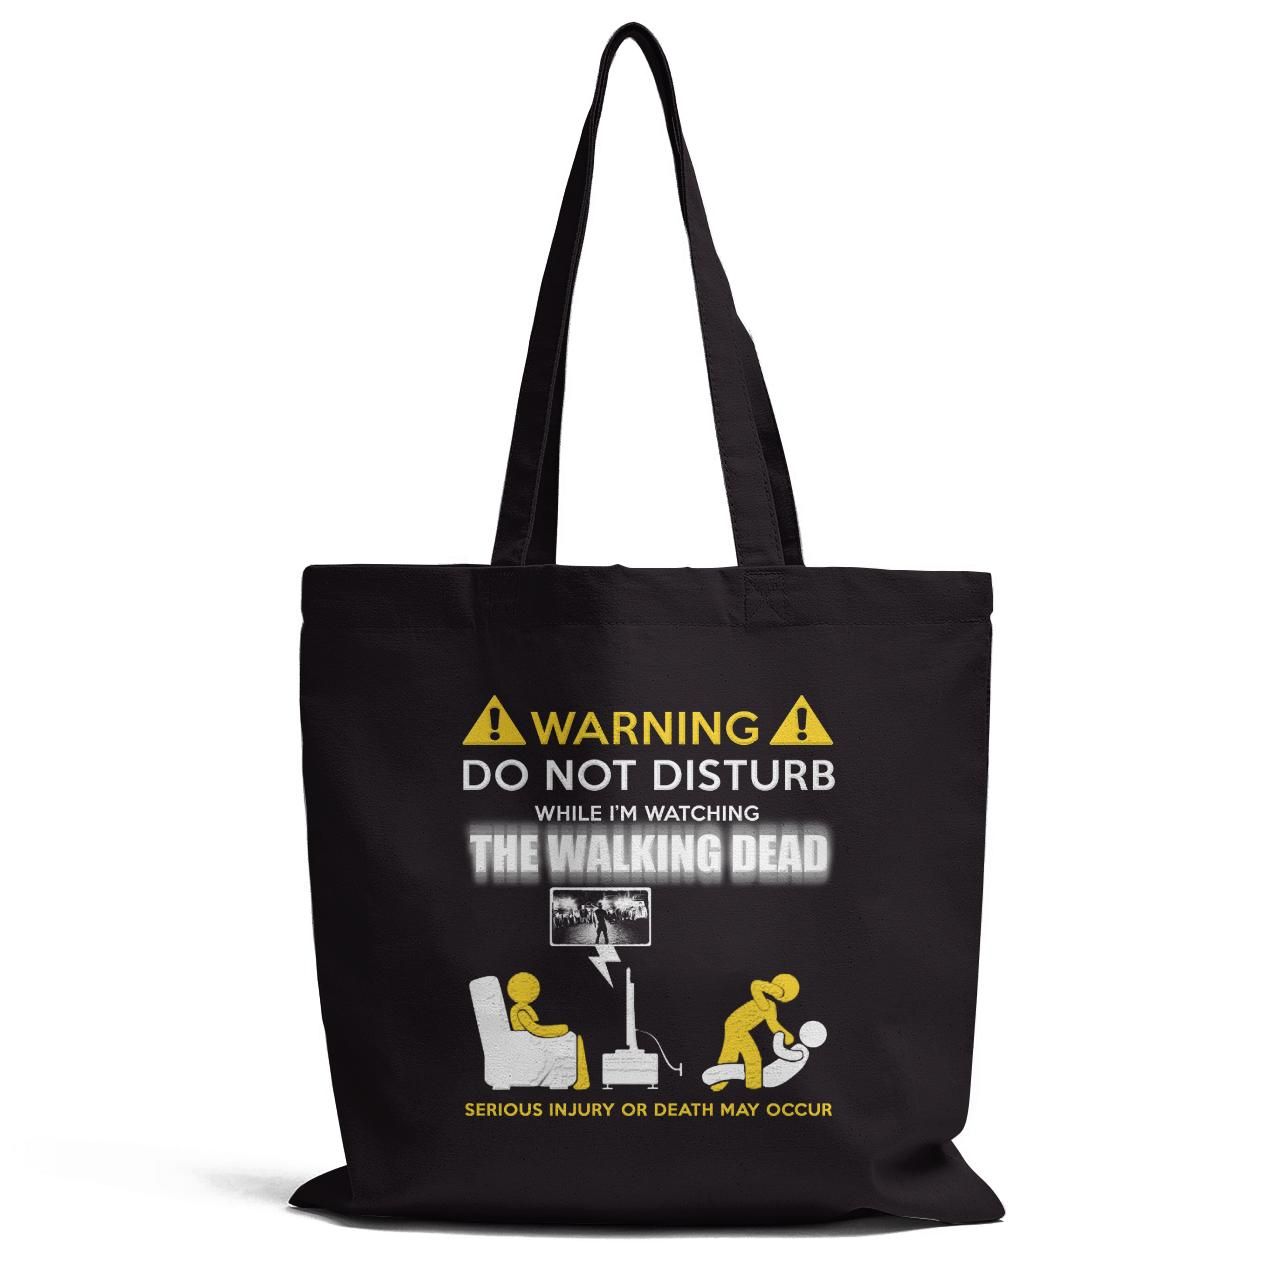 Waring Do Not Disturb While I Am Watching Tote Bag